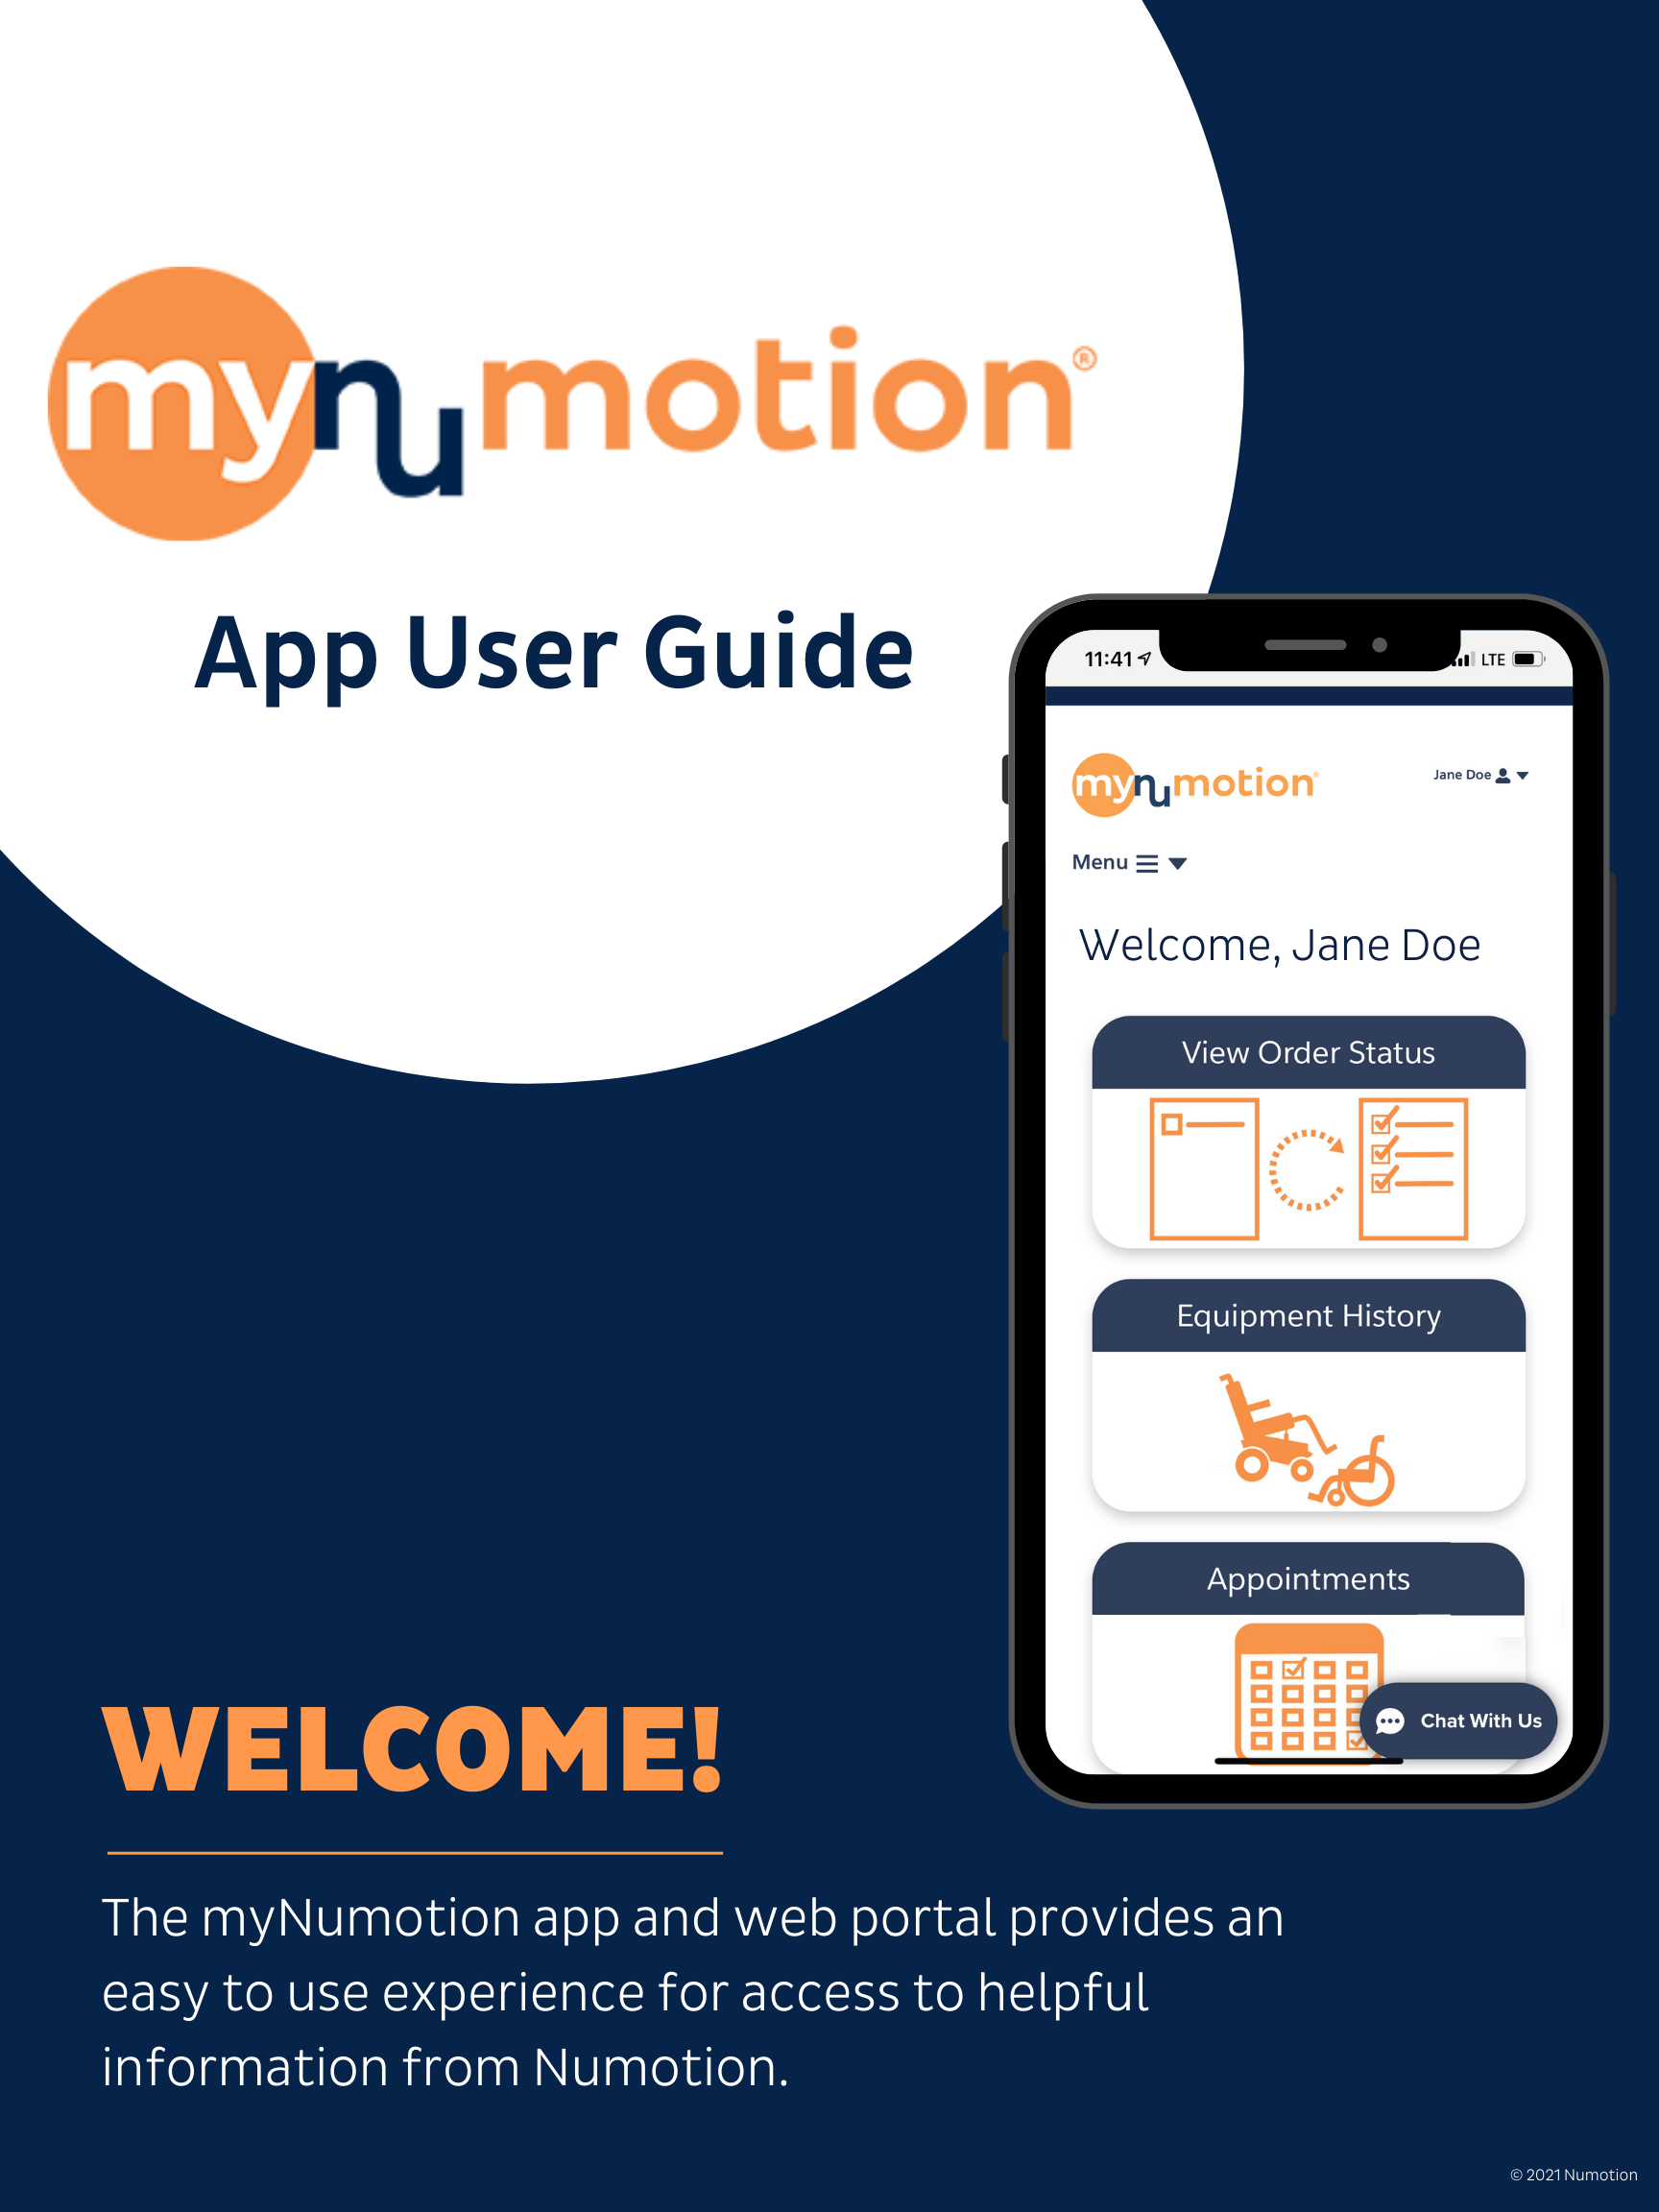 myNumotion-App-User-Guide-7-9-21.png